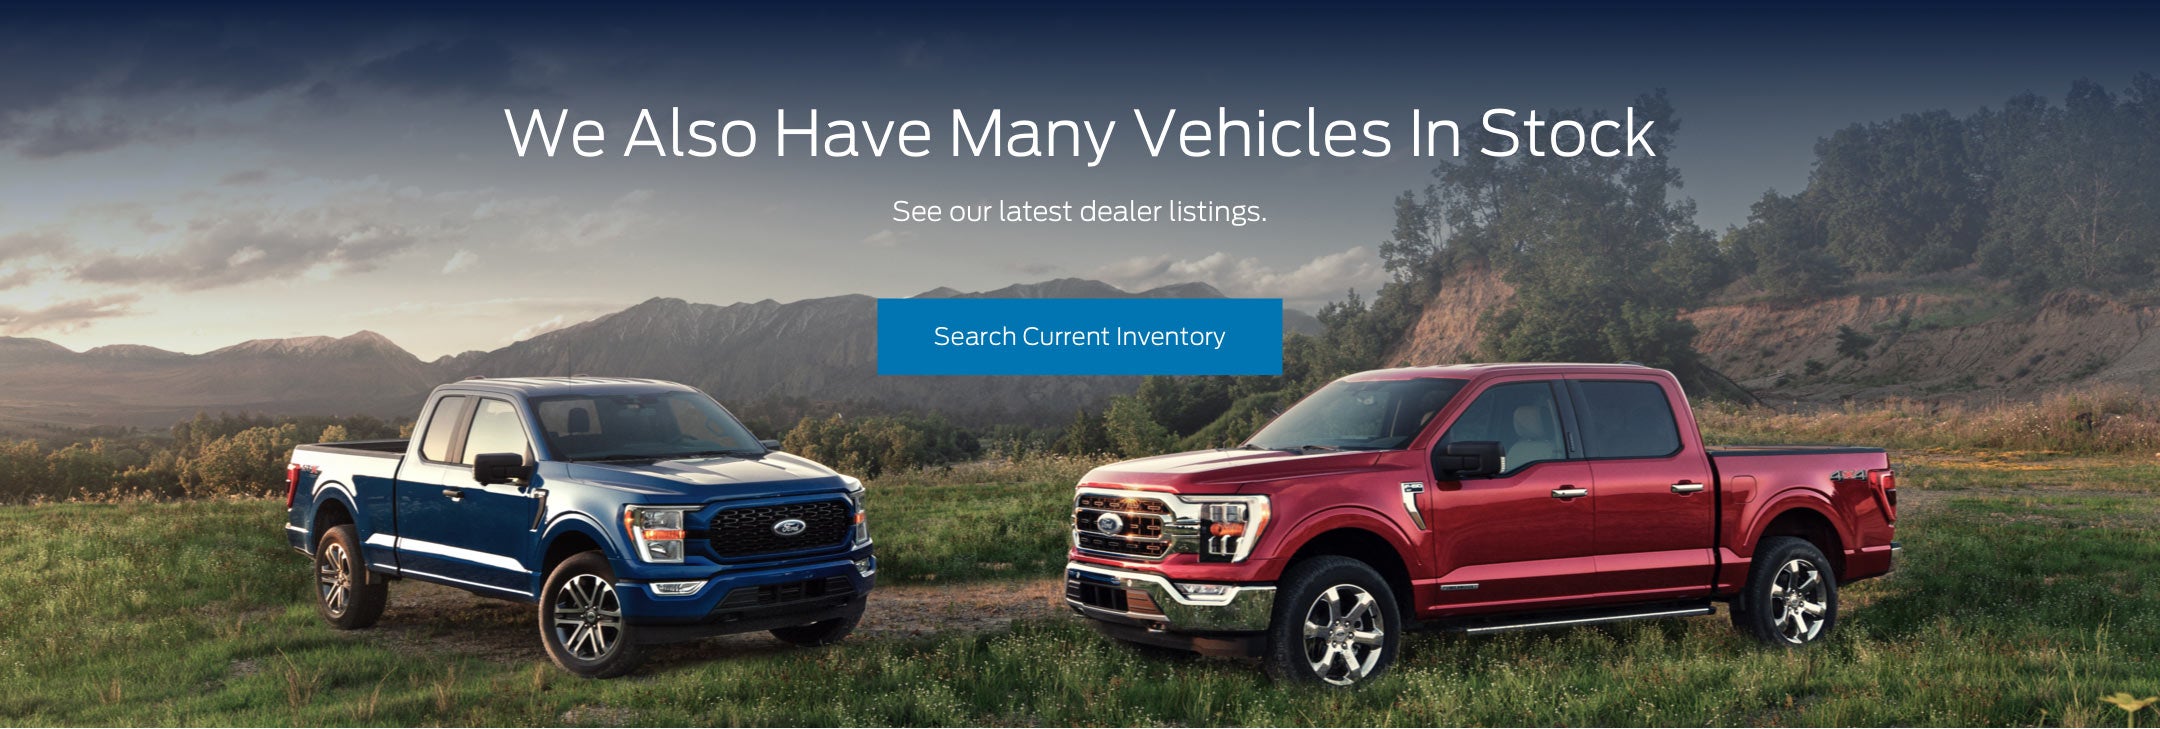 Ford vehicles in stock | Swant Graber Ford in Barron WI